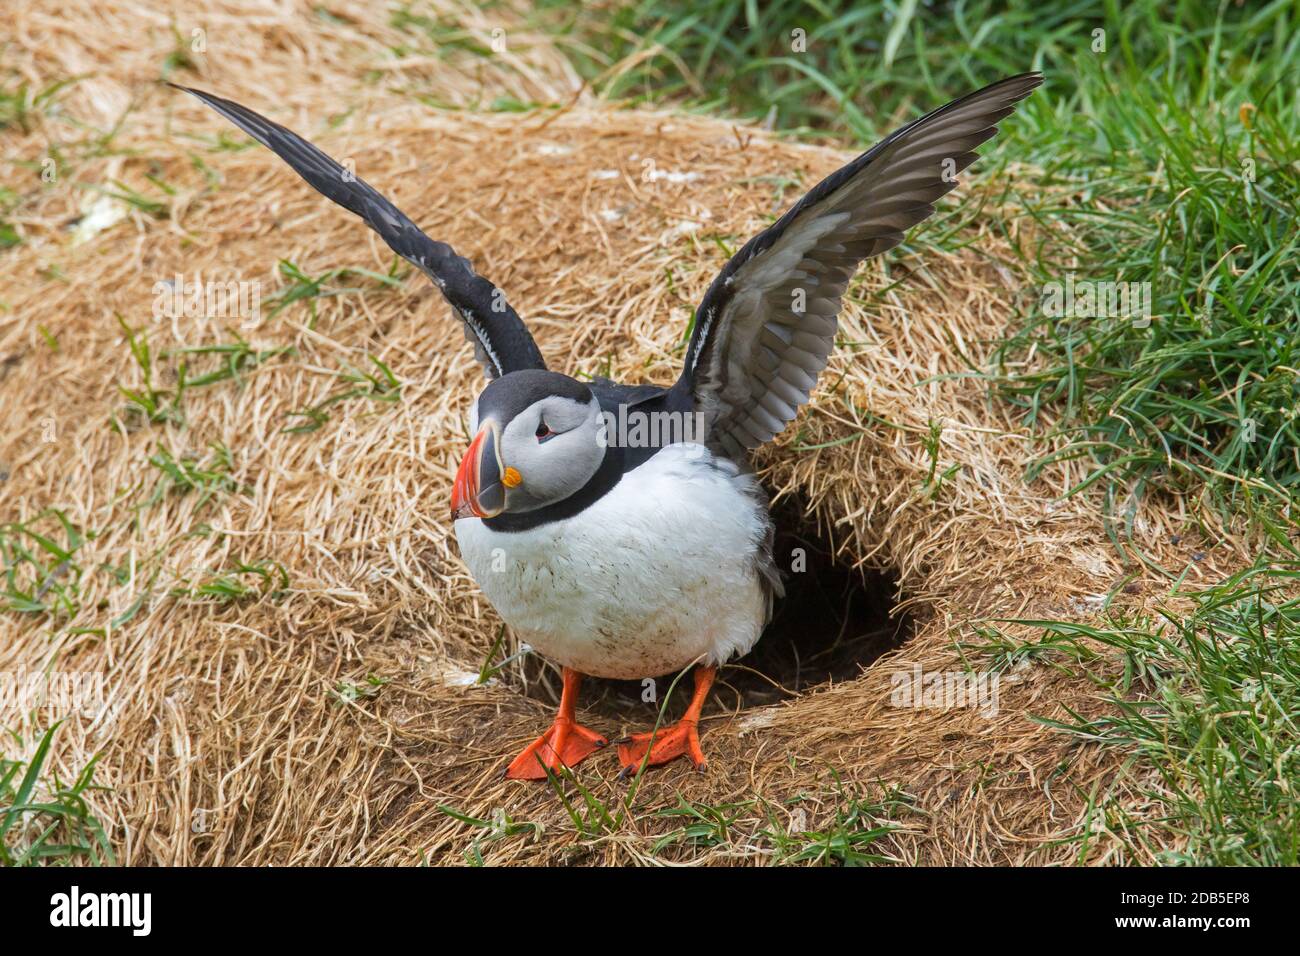 Atlantic puffin (Fratercula arctica) stretching wings after emerging from burrow entrance on sea cliff top in seabird colony in summer Stock Photo